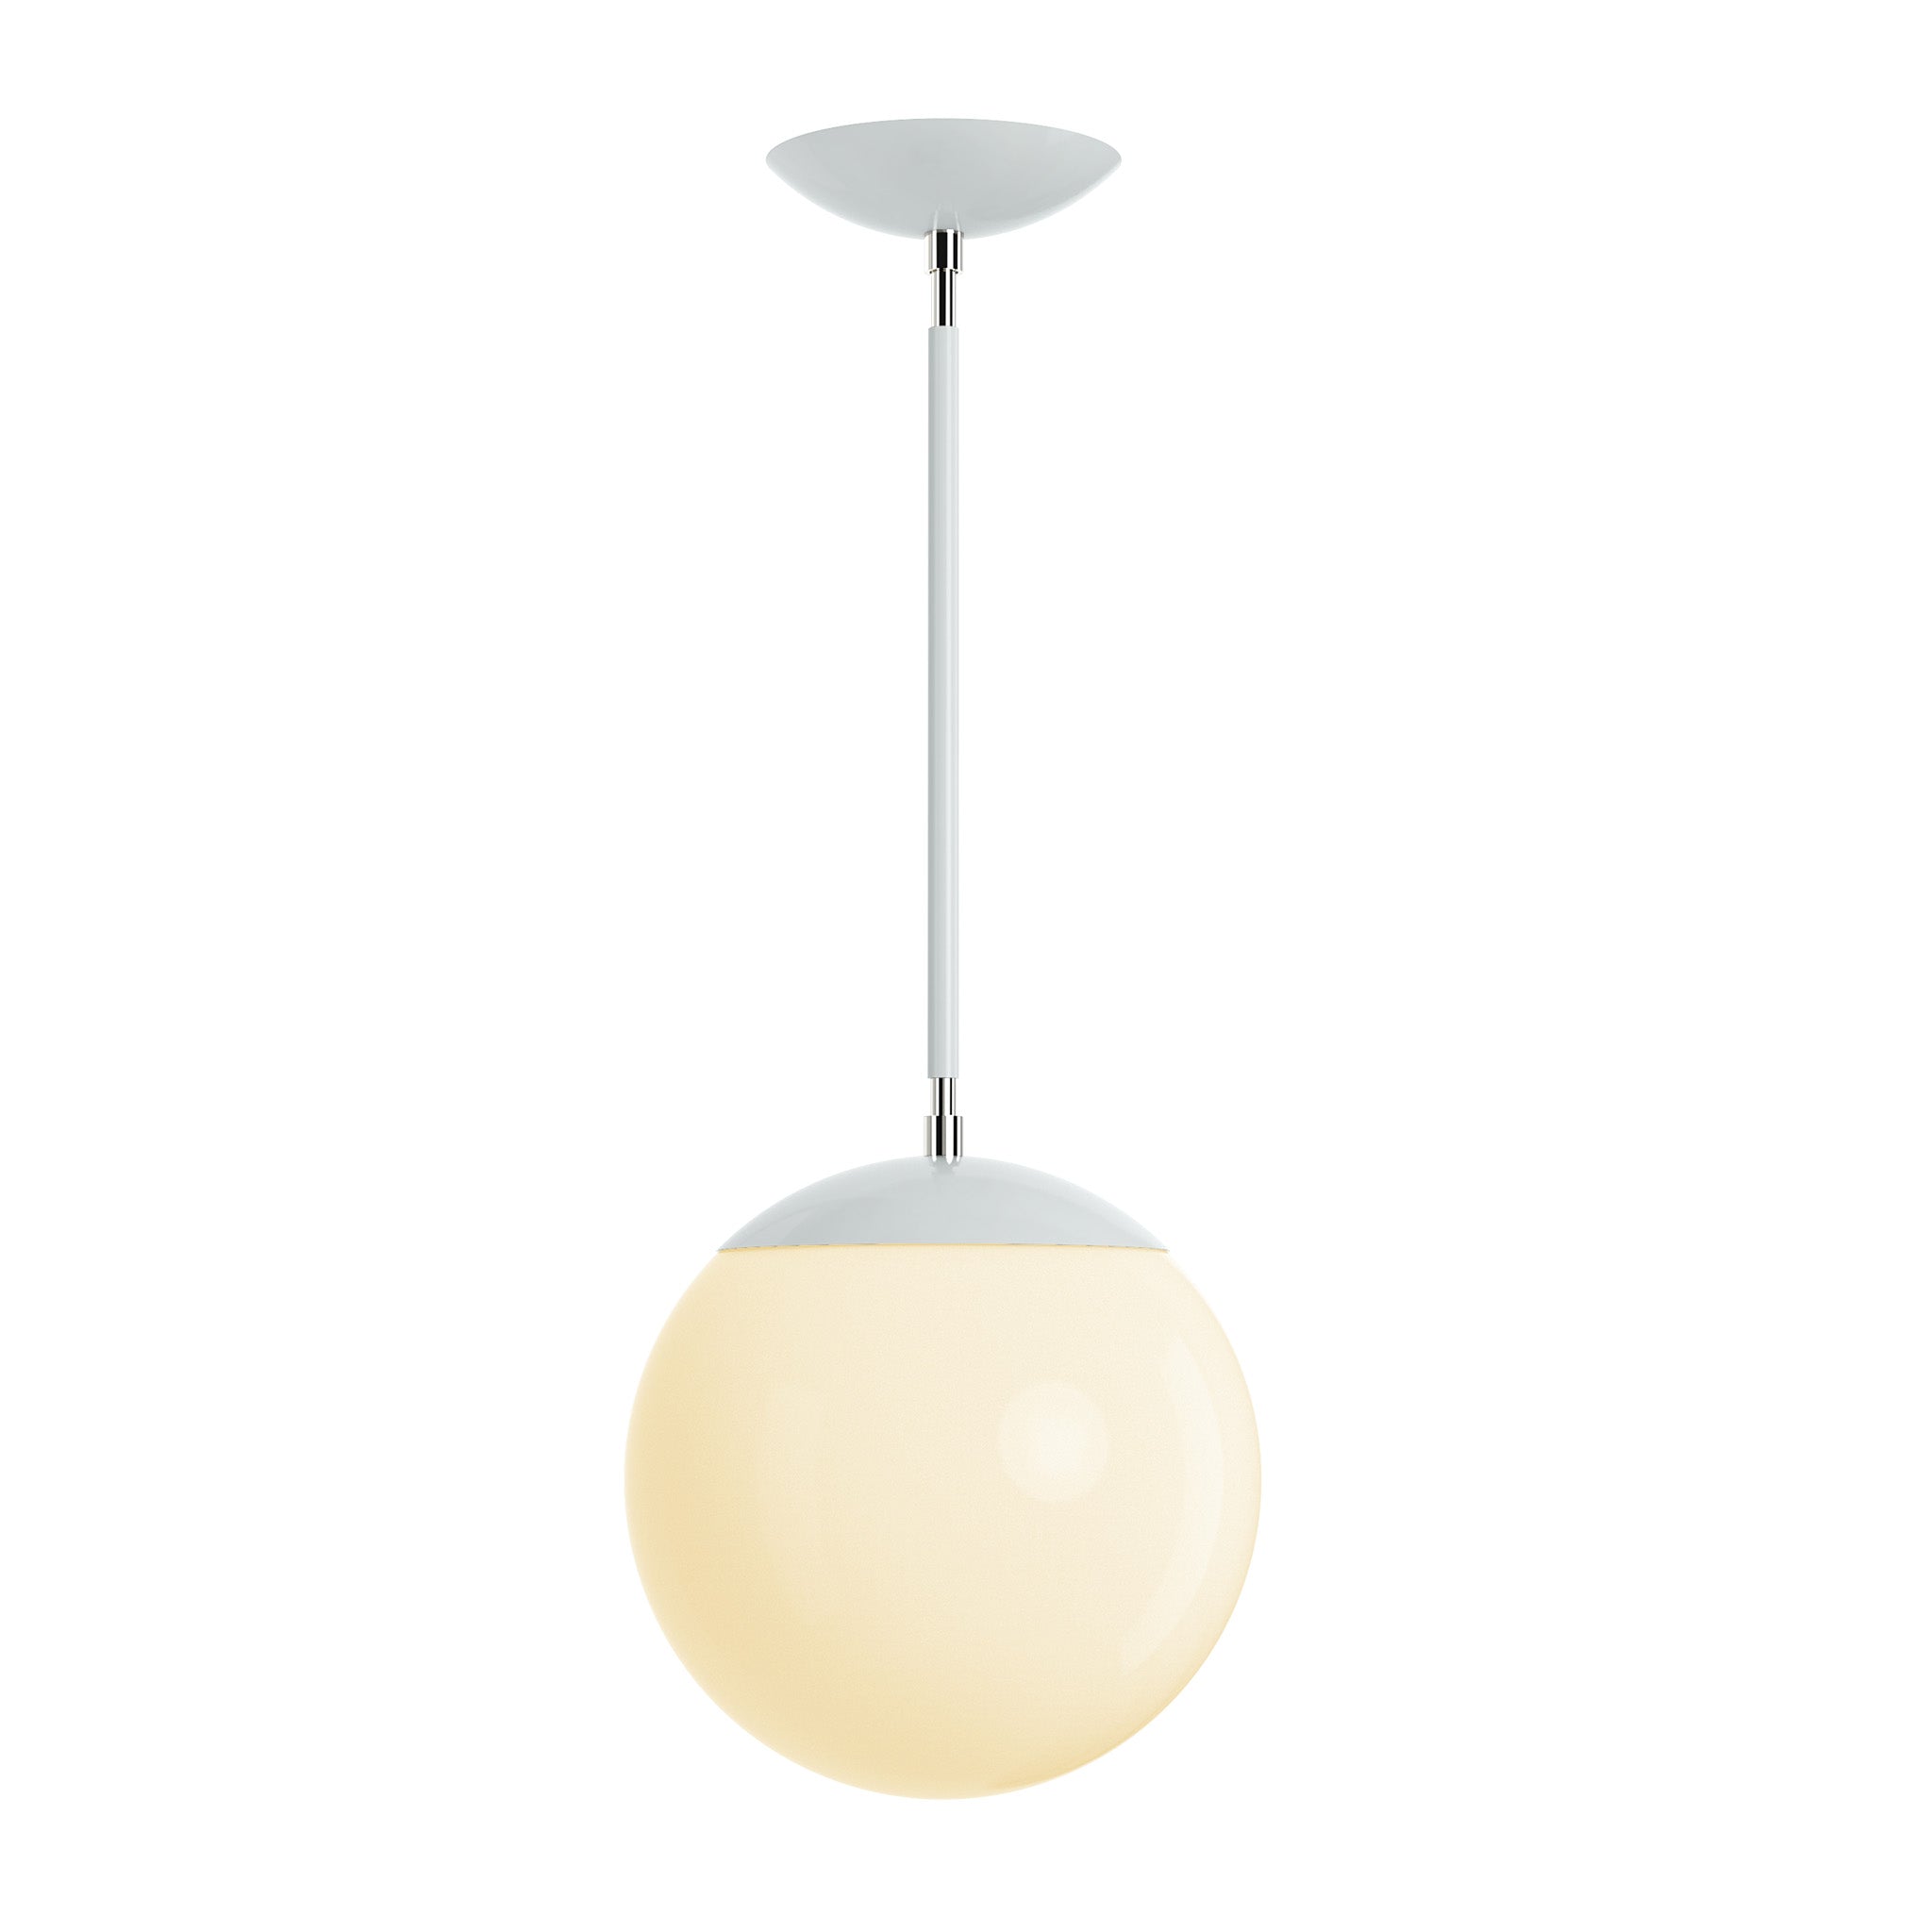 Polished nickel and chalk cap globe pendant 10" dutton brown lighting